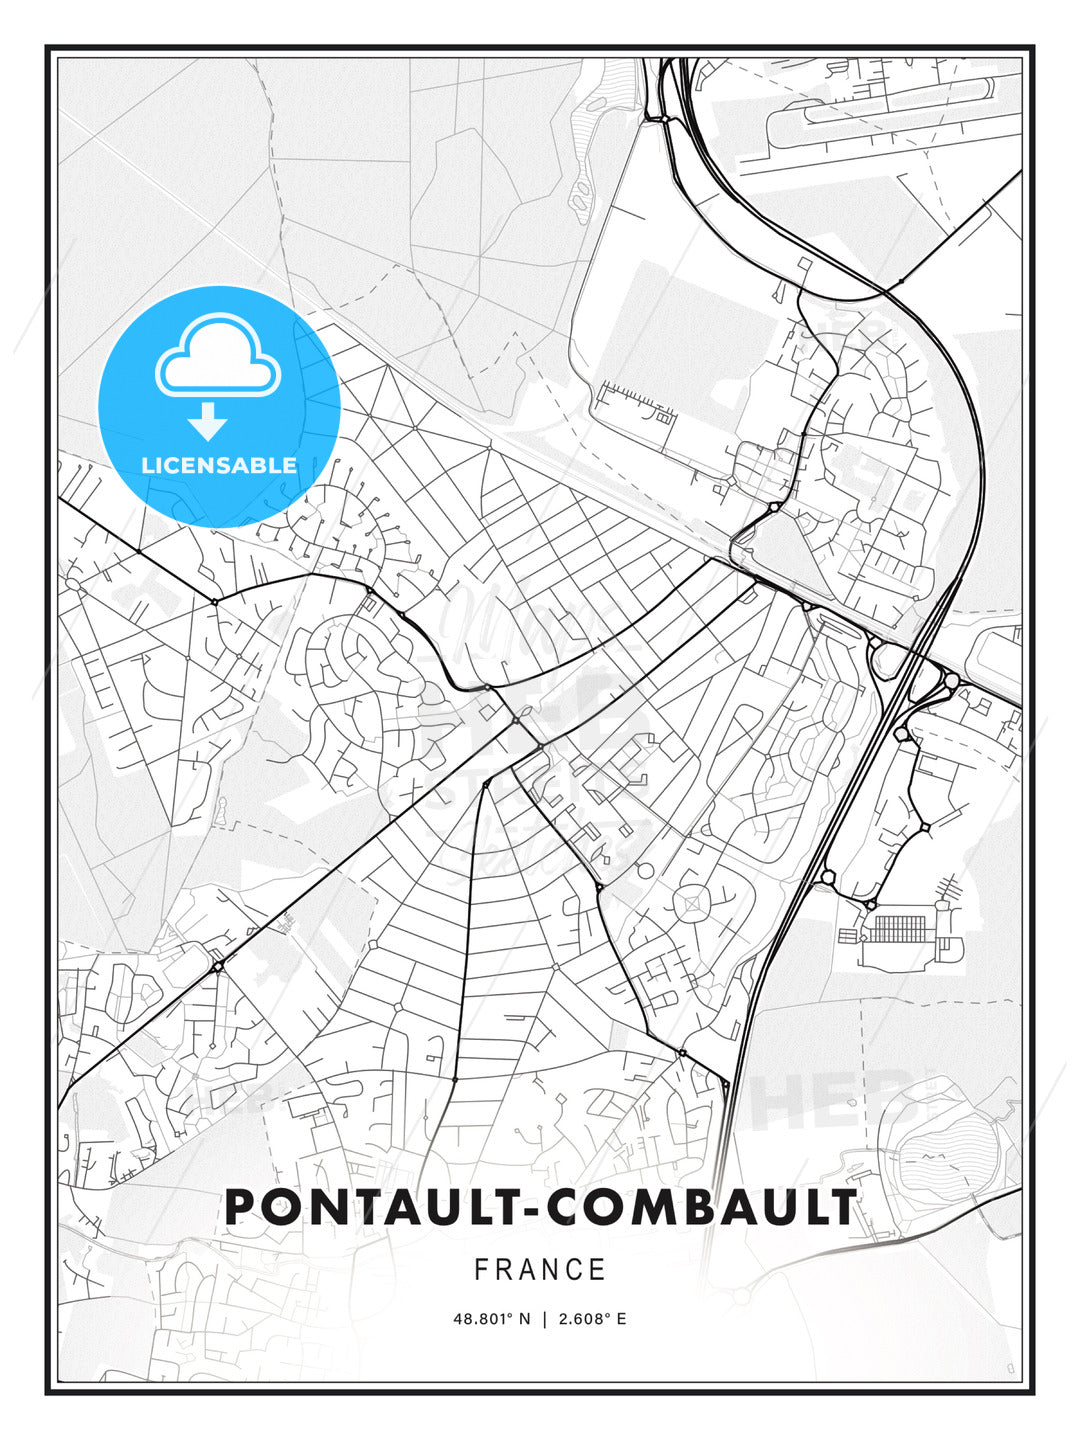 Pontault-Combault, France, Modern Print Template in Various Formats - HEBSTREITS Sketches